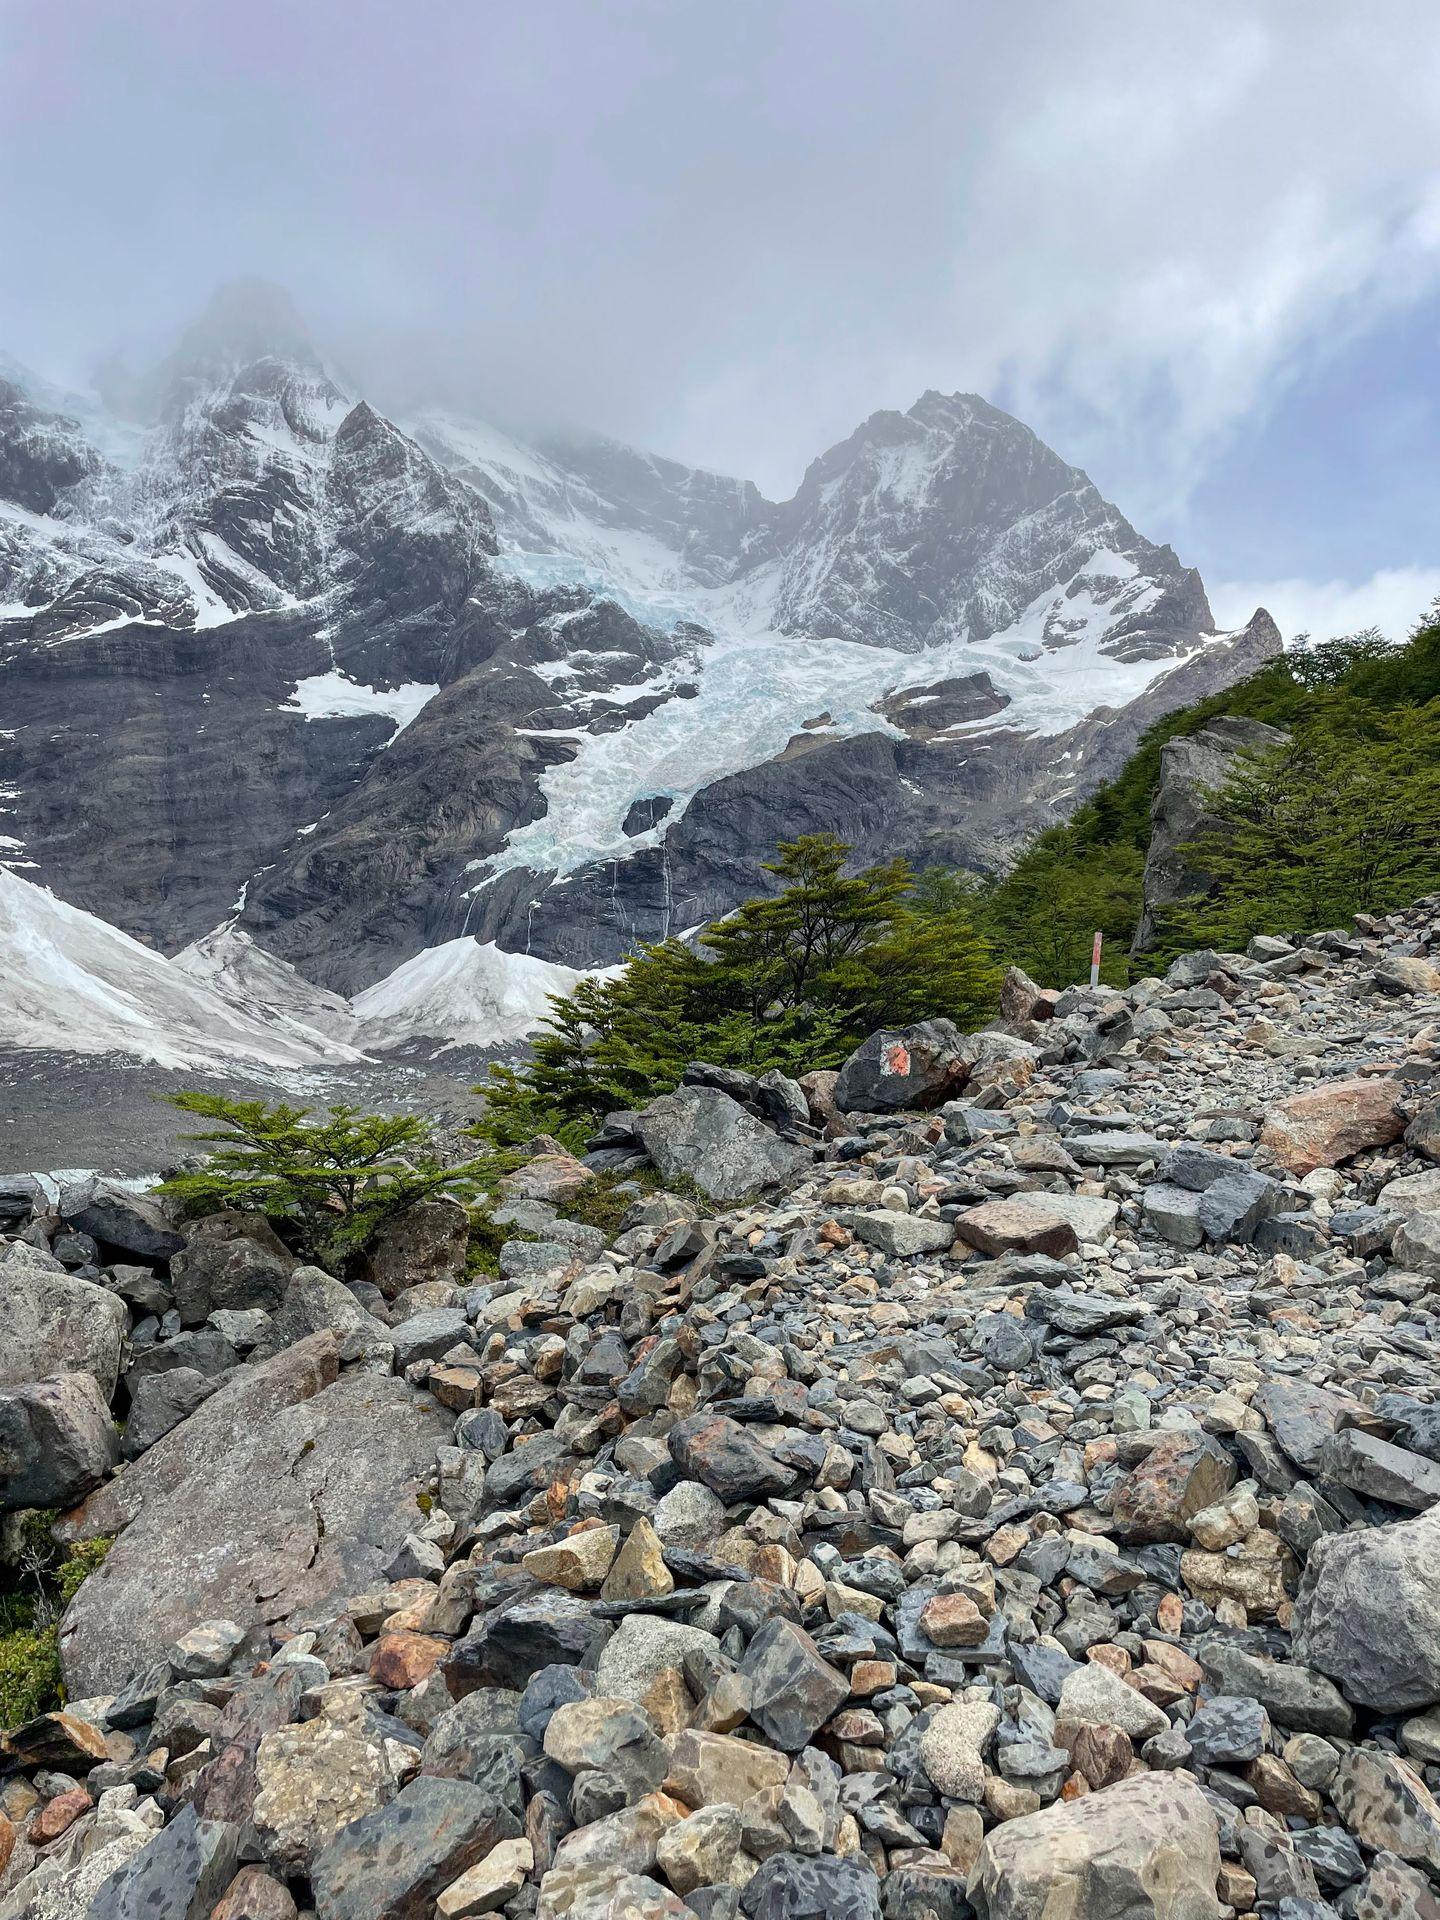 A rocky trail with a view of mountains full of glaciers in the distance.